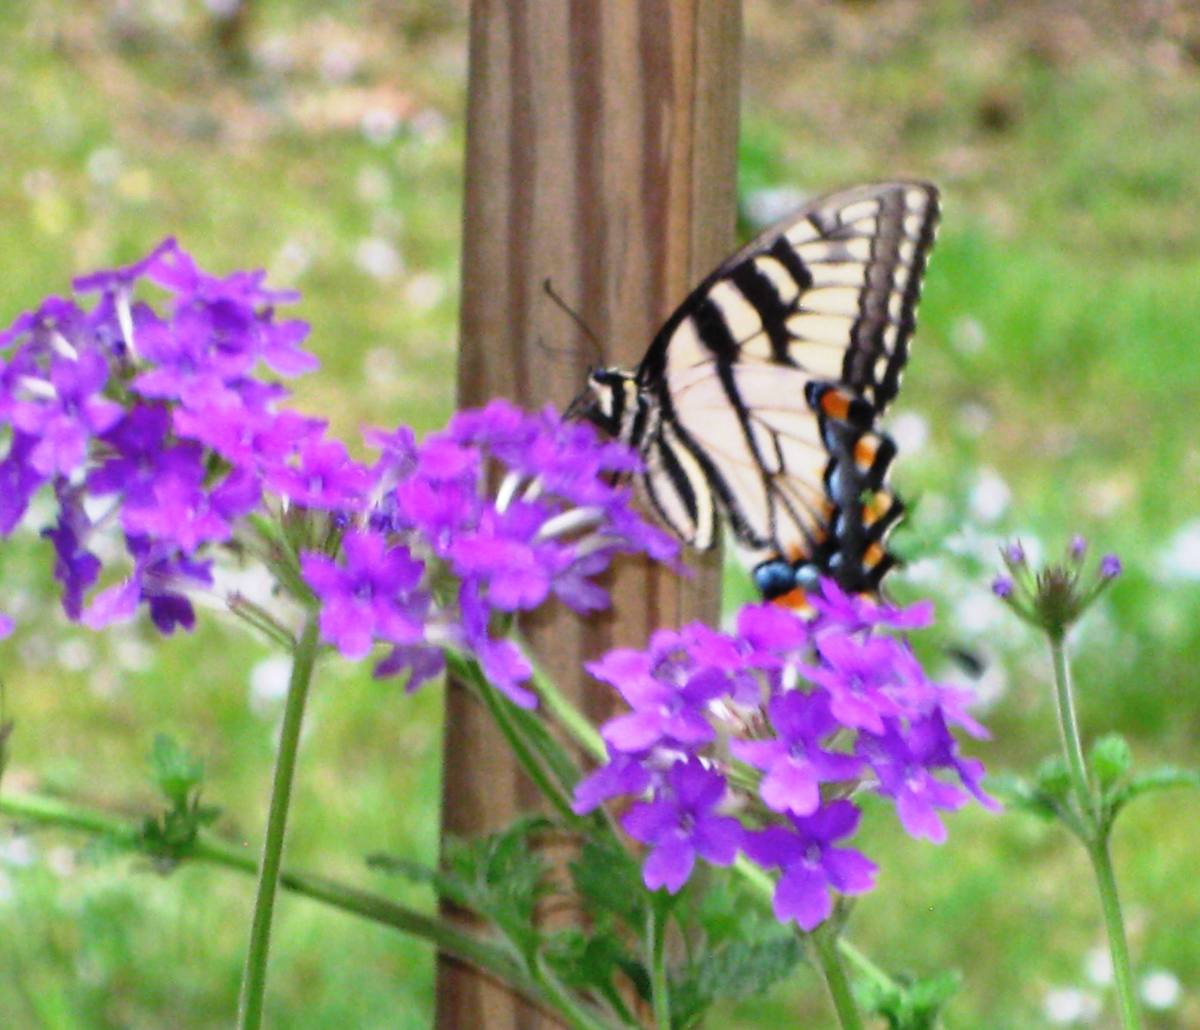 First Swallowtail in 2013 backyard photos, by Rosa Blue for Green Healing Notes, the Blog!